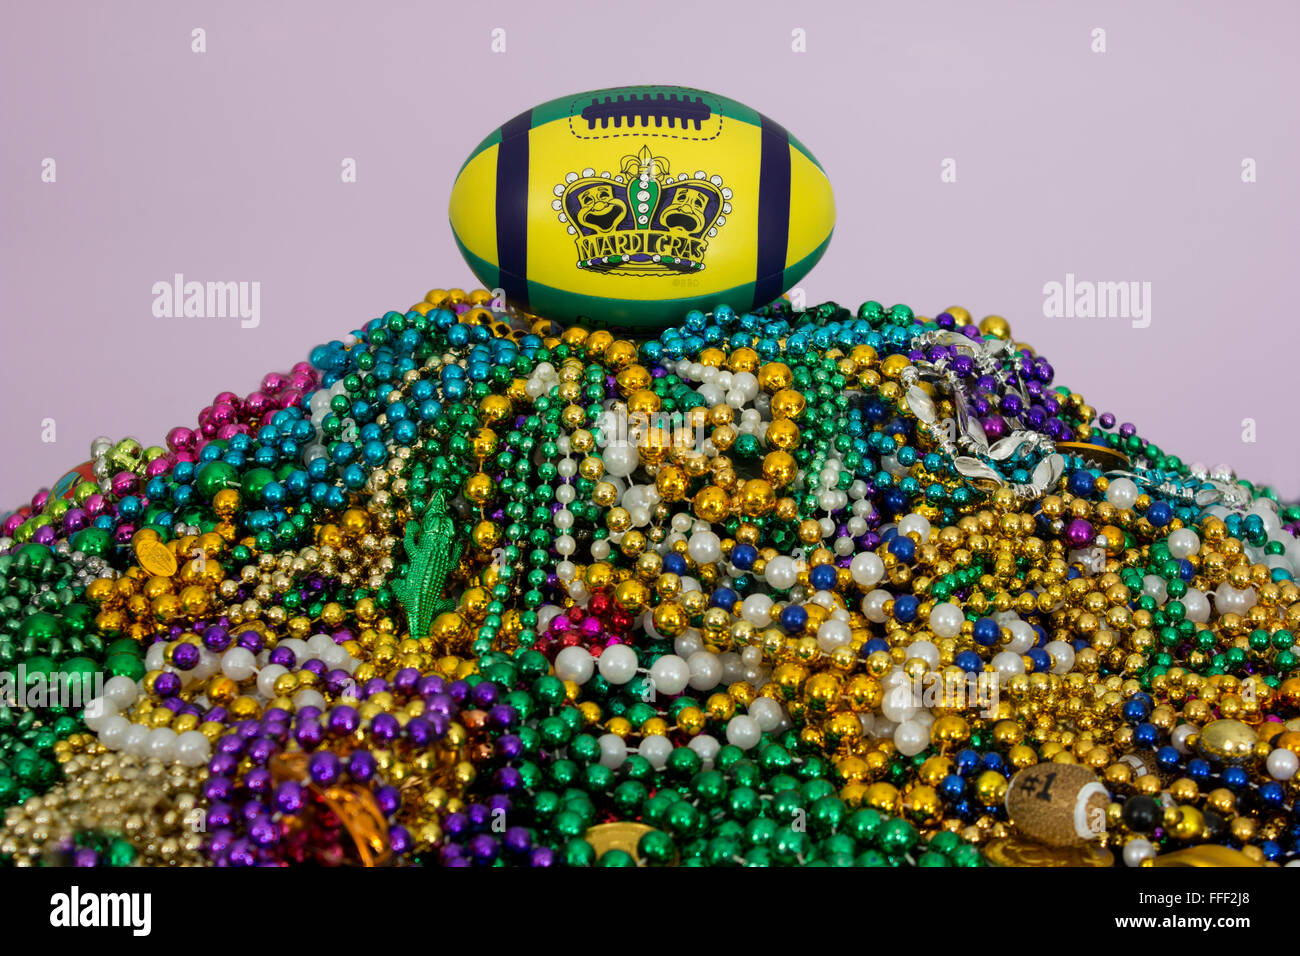 Mardi Gras masks and king's crown printed on an American football, perched on top of a huge pile of Mardi Gras beads. Stock Photo